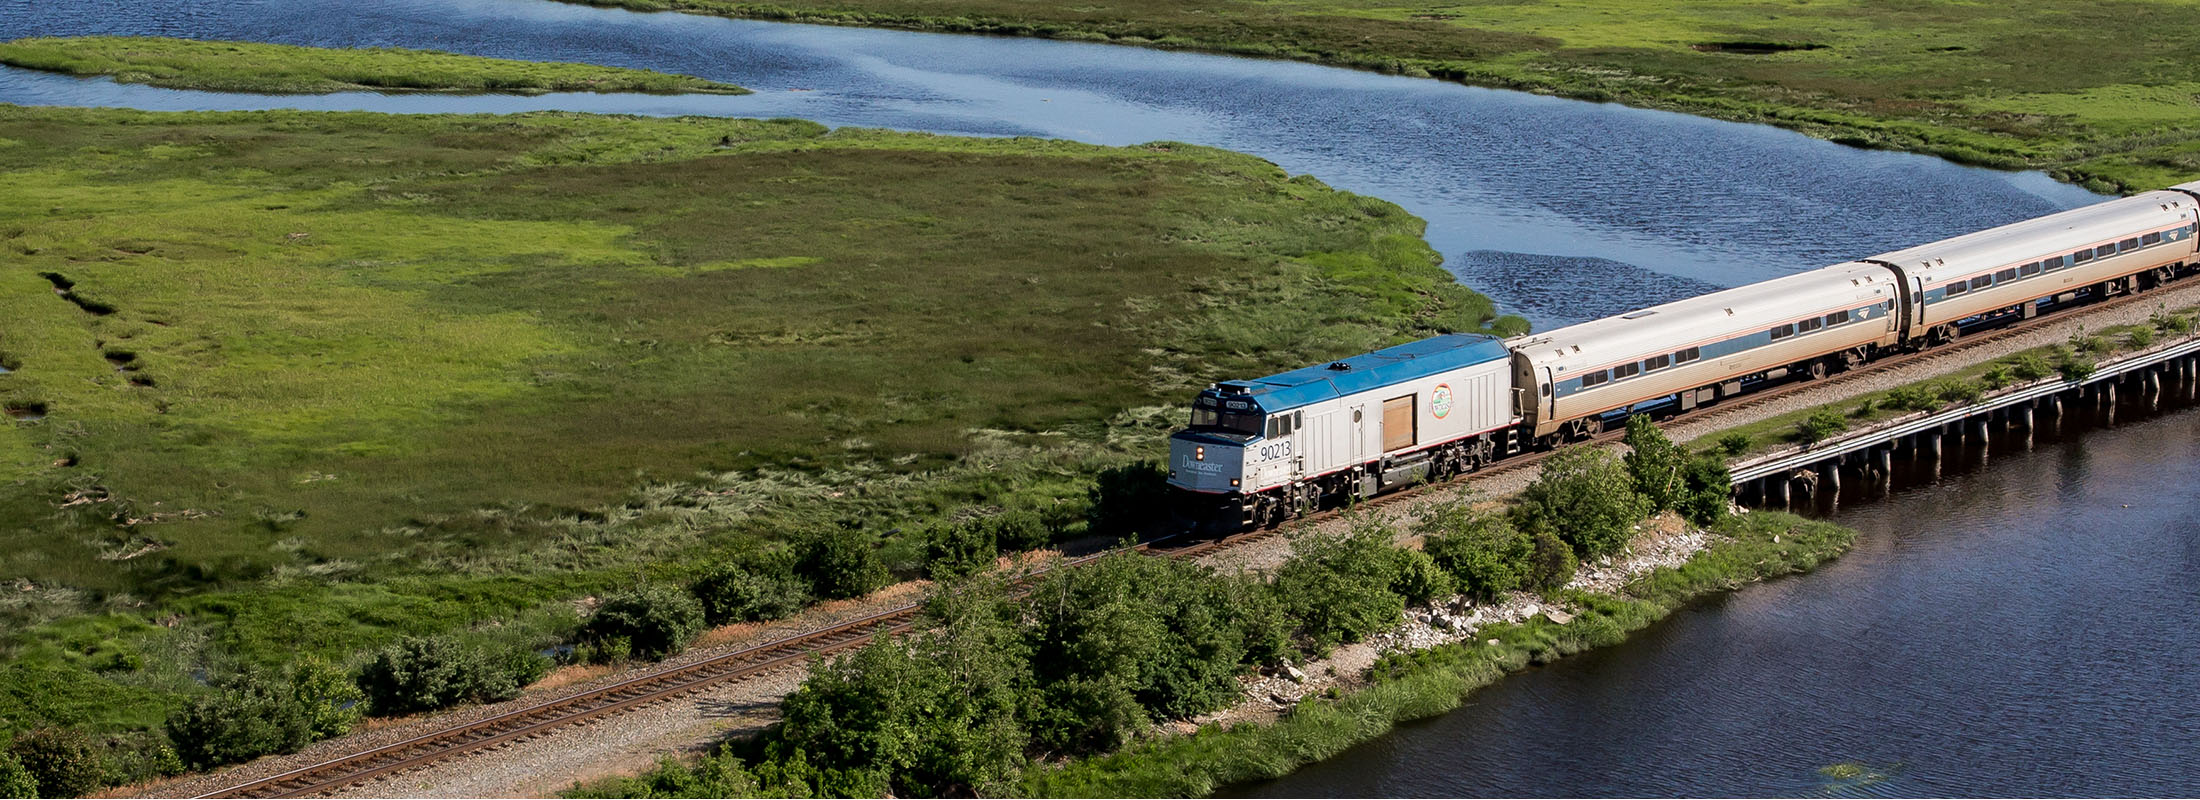 Downeaster Aerial View Train Image 